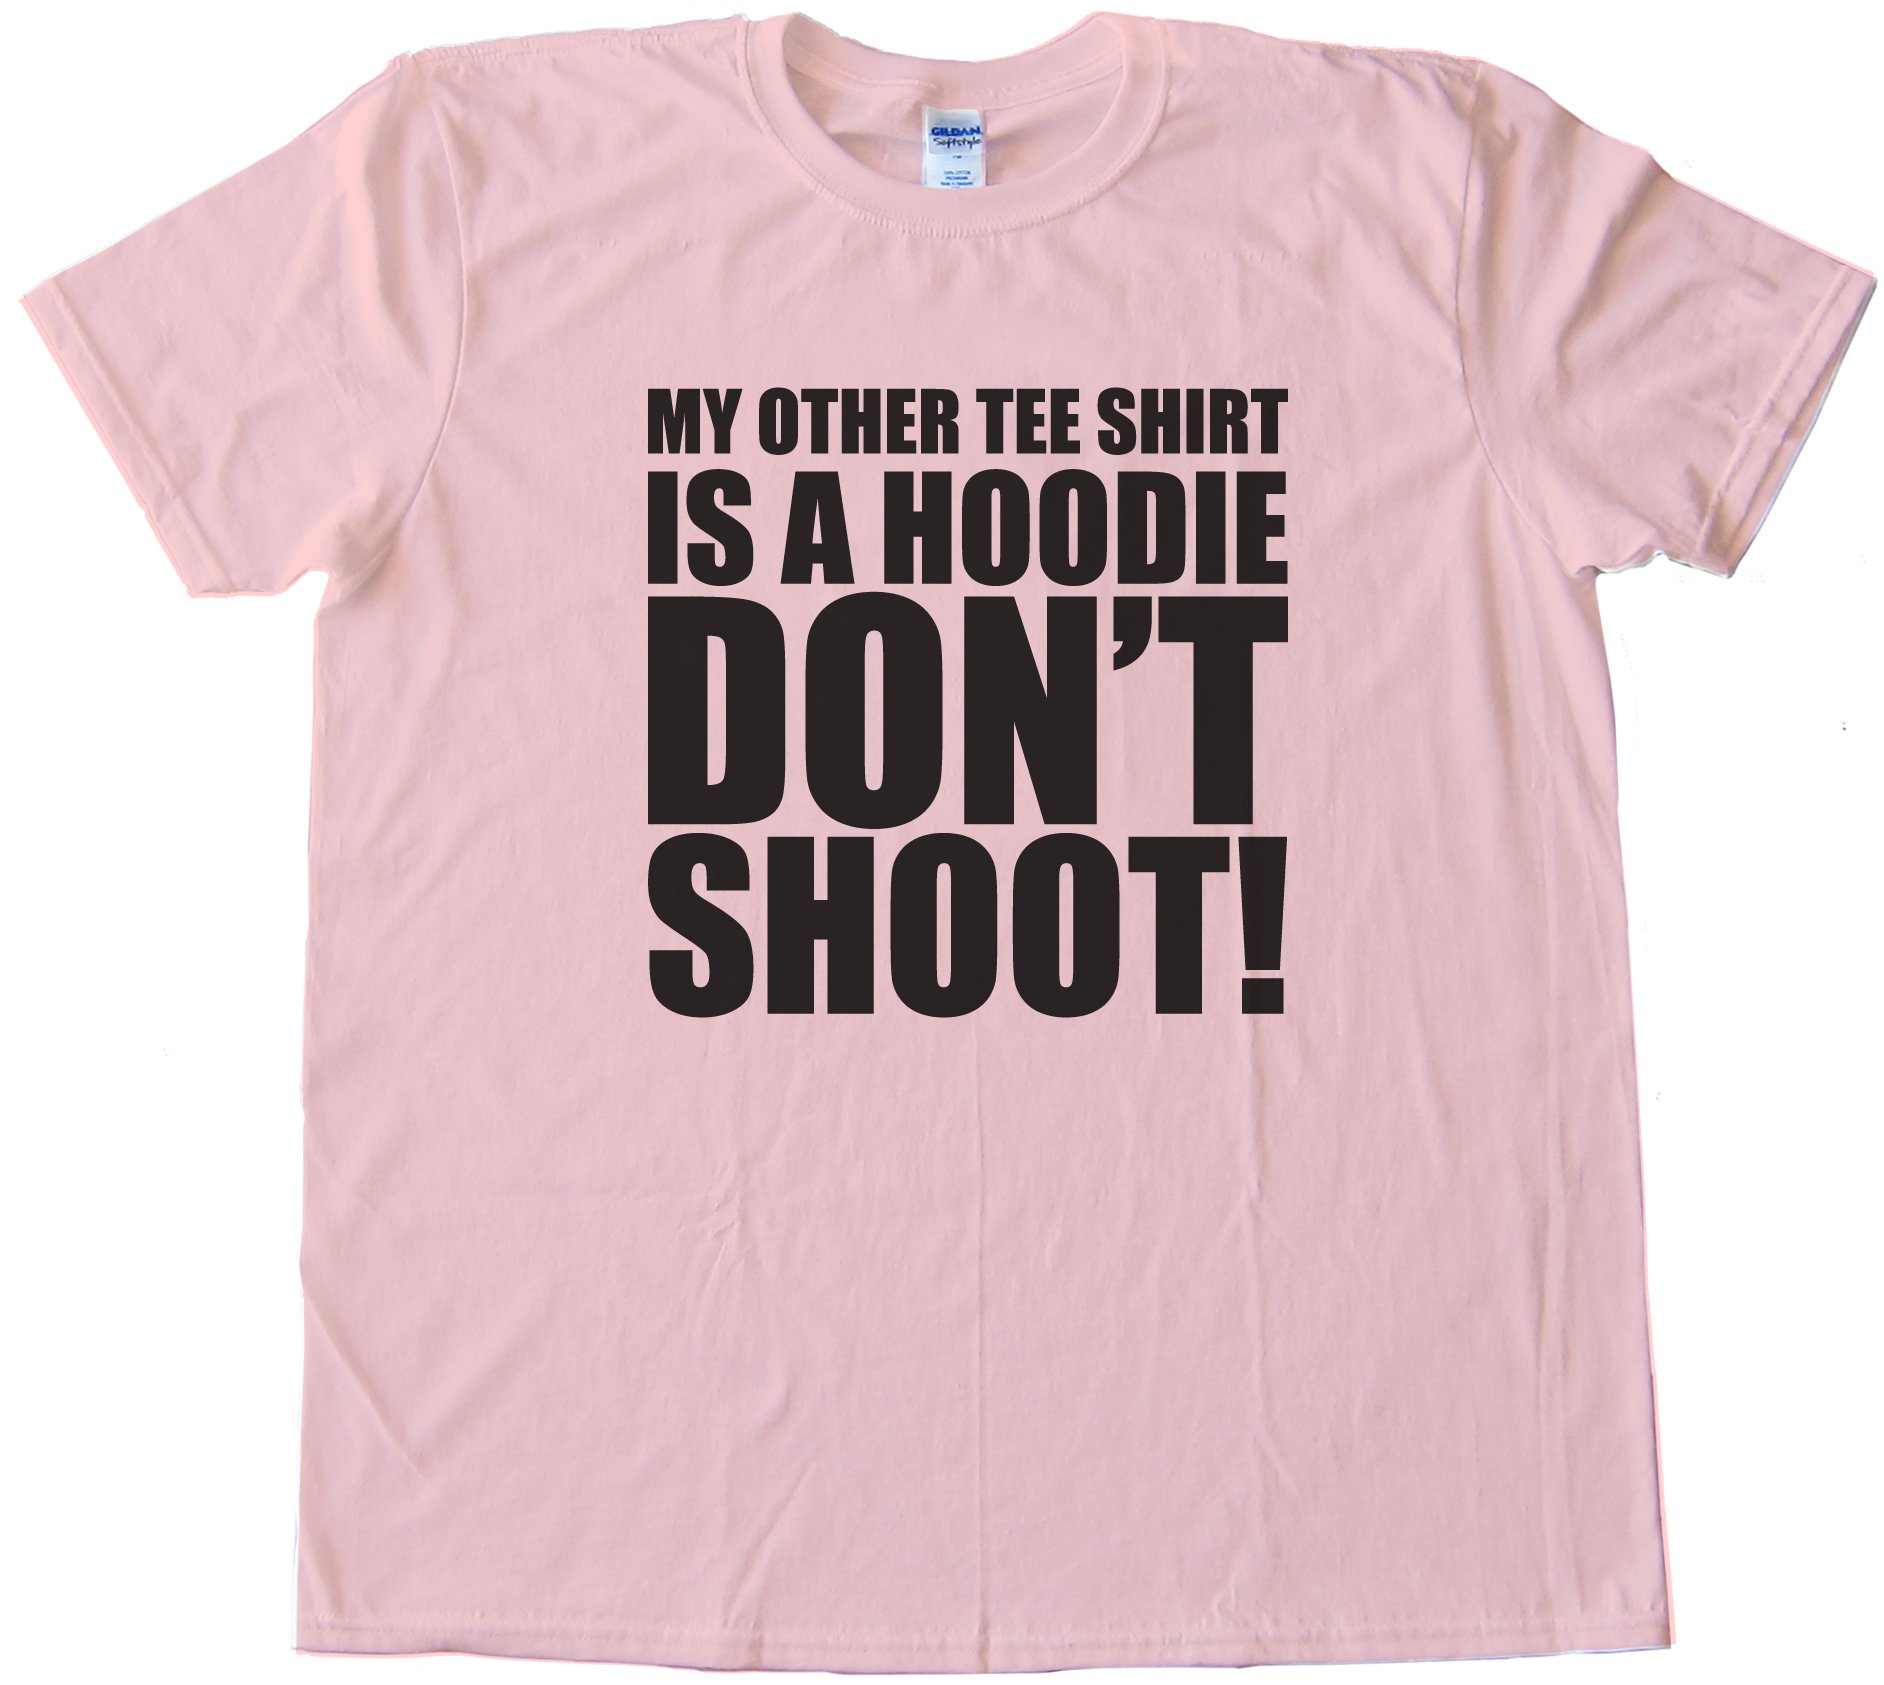 My Other Tee Shirt Is A Hoodie - Don'T Shoot!Tee Shirt